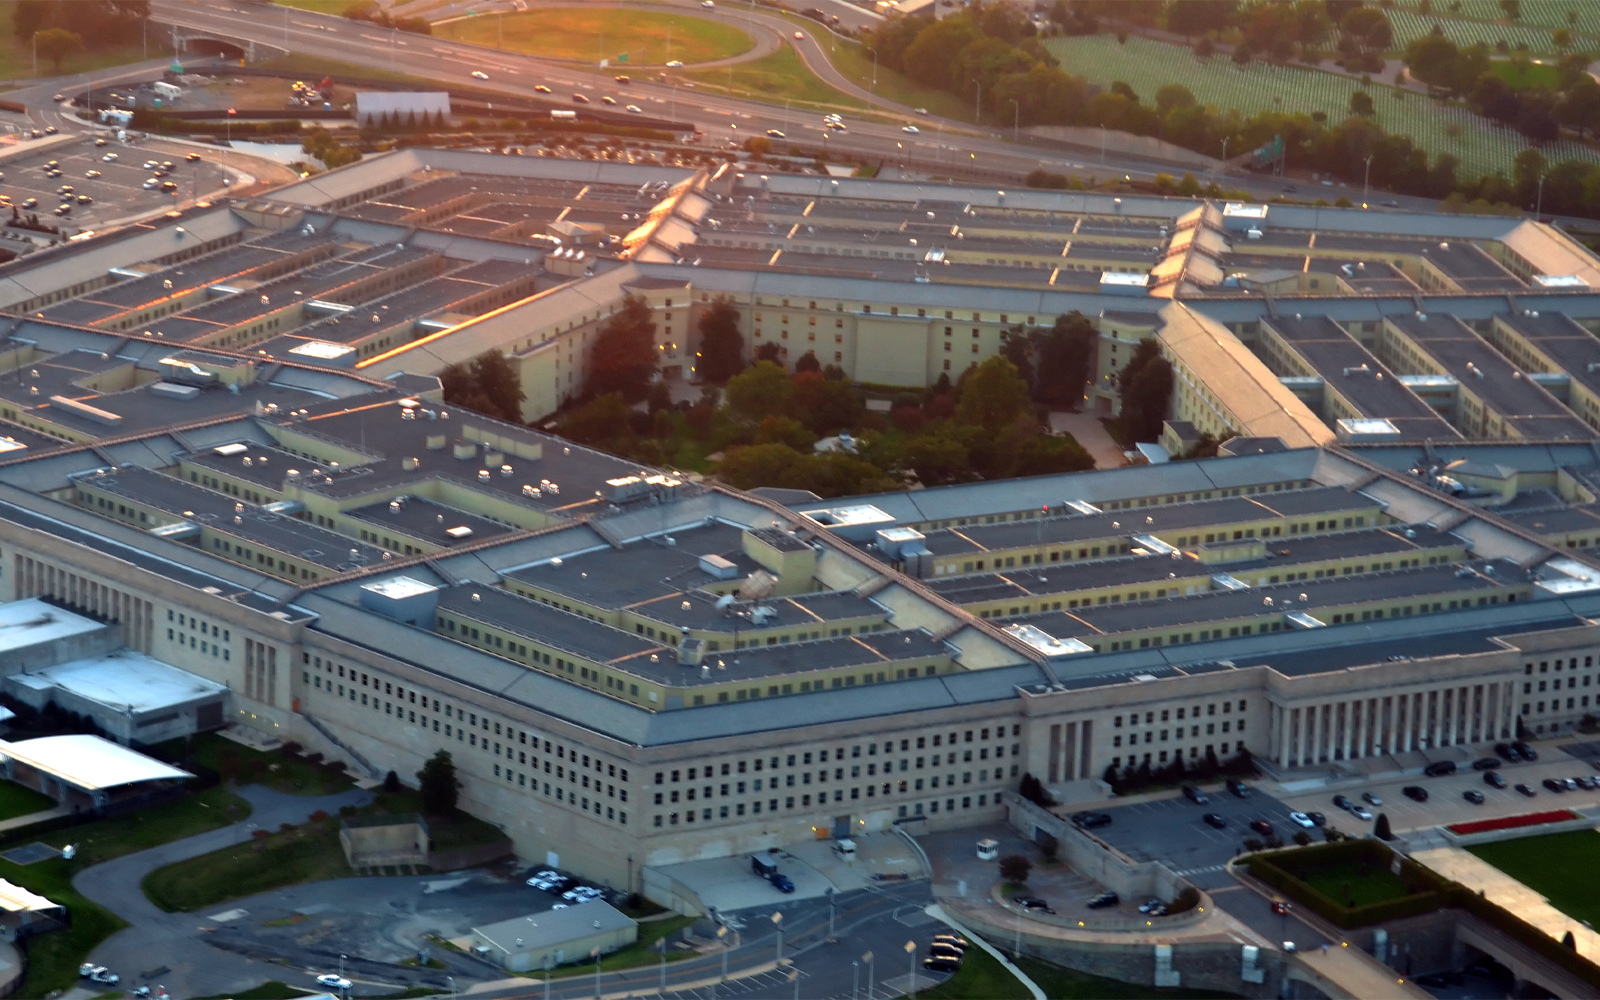 Ariel view of the Pentagon